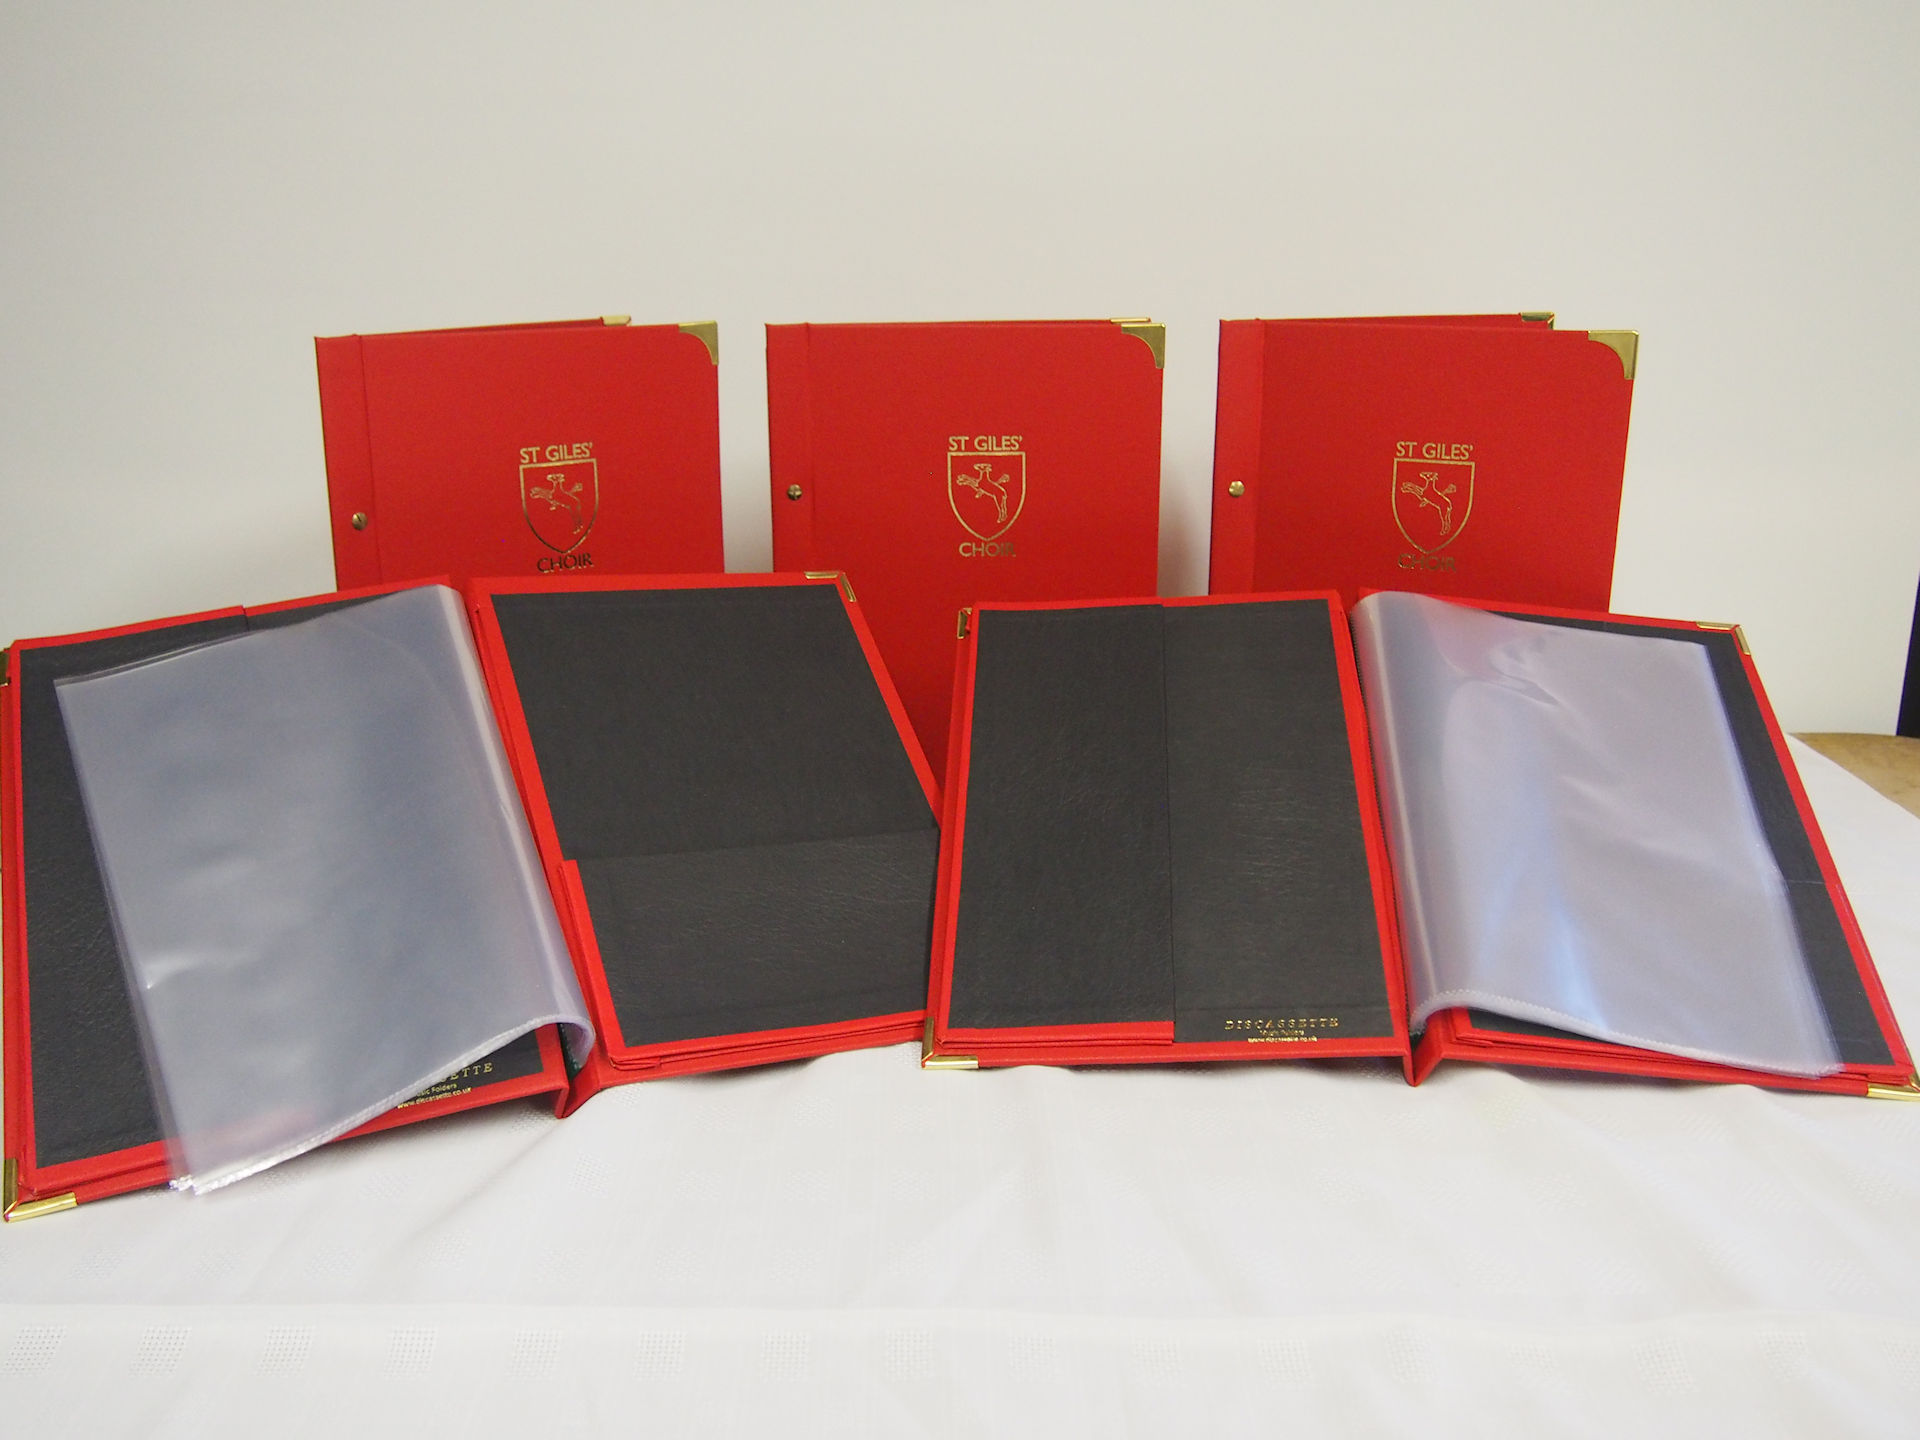 Q2 Choir Folder in Red and Gold